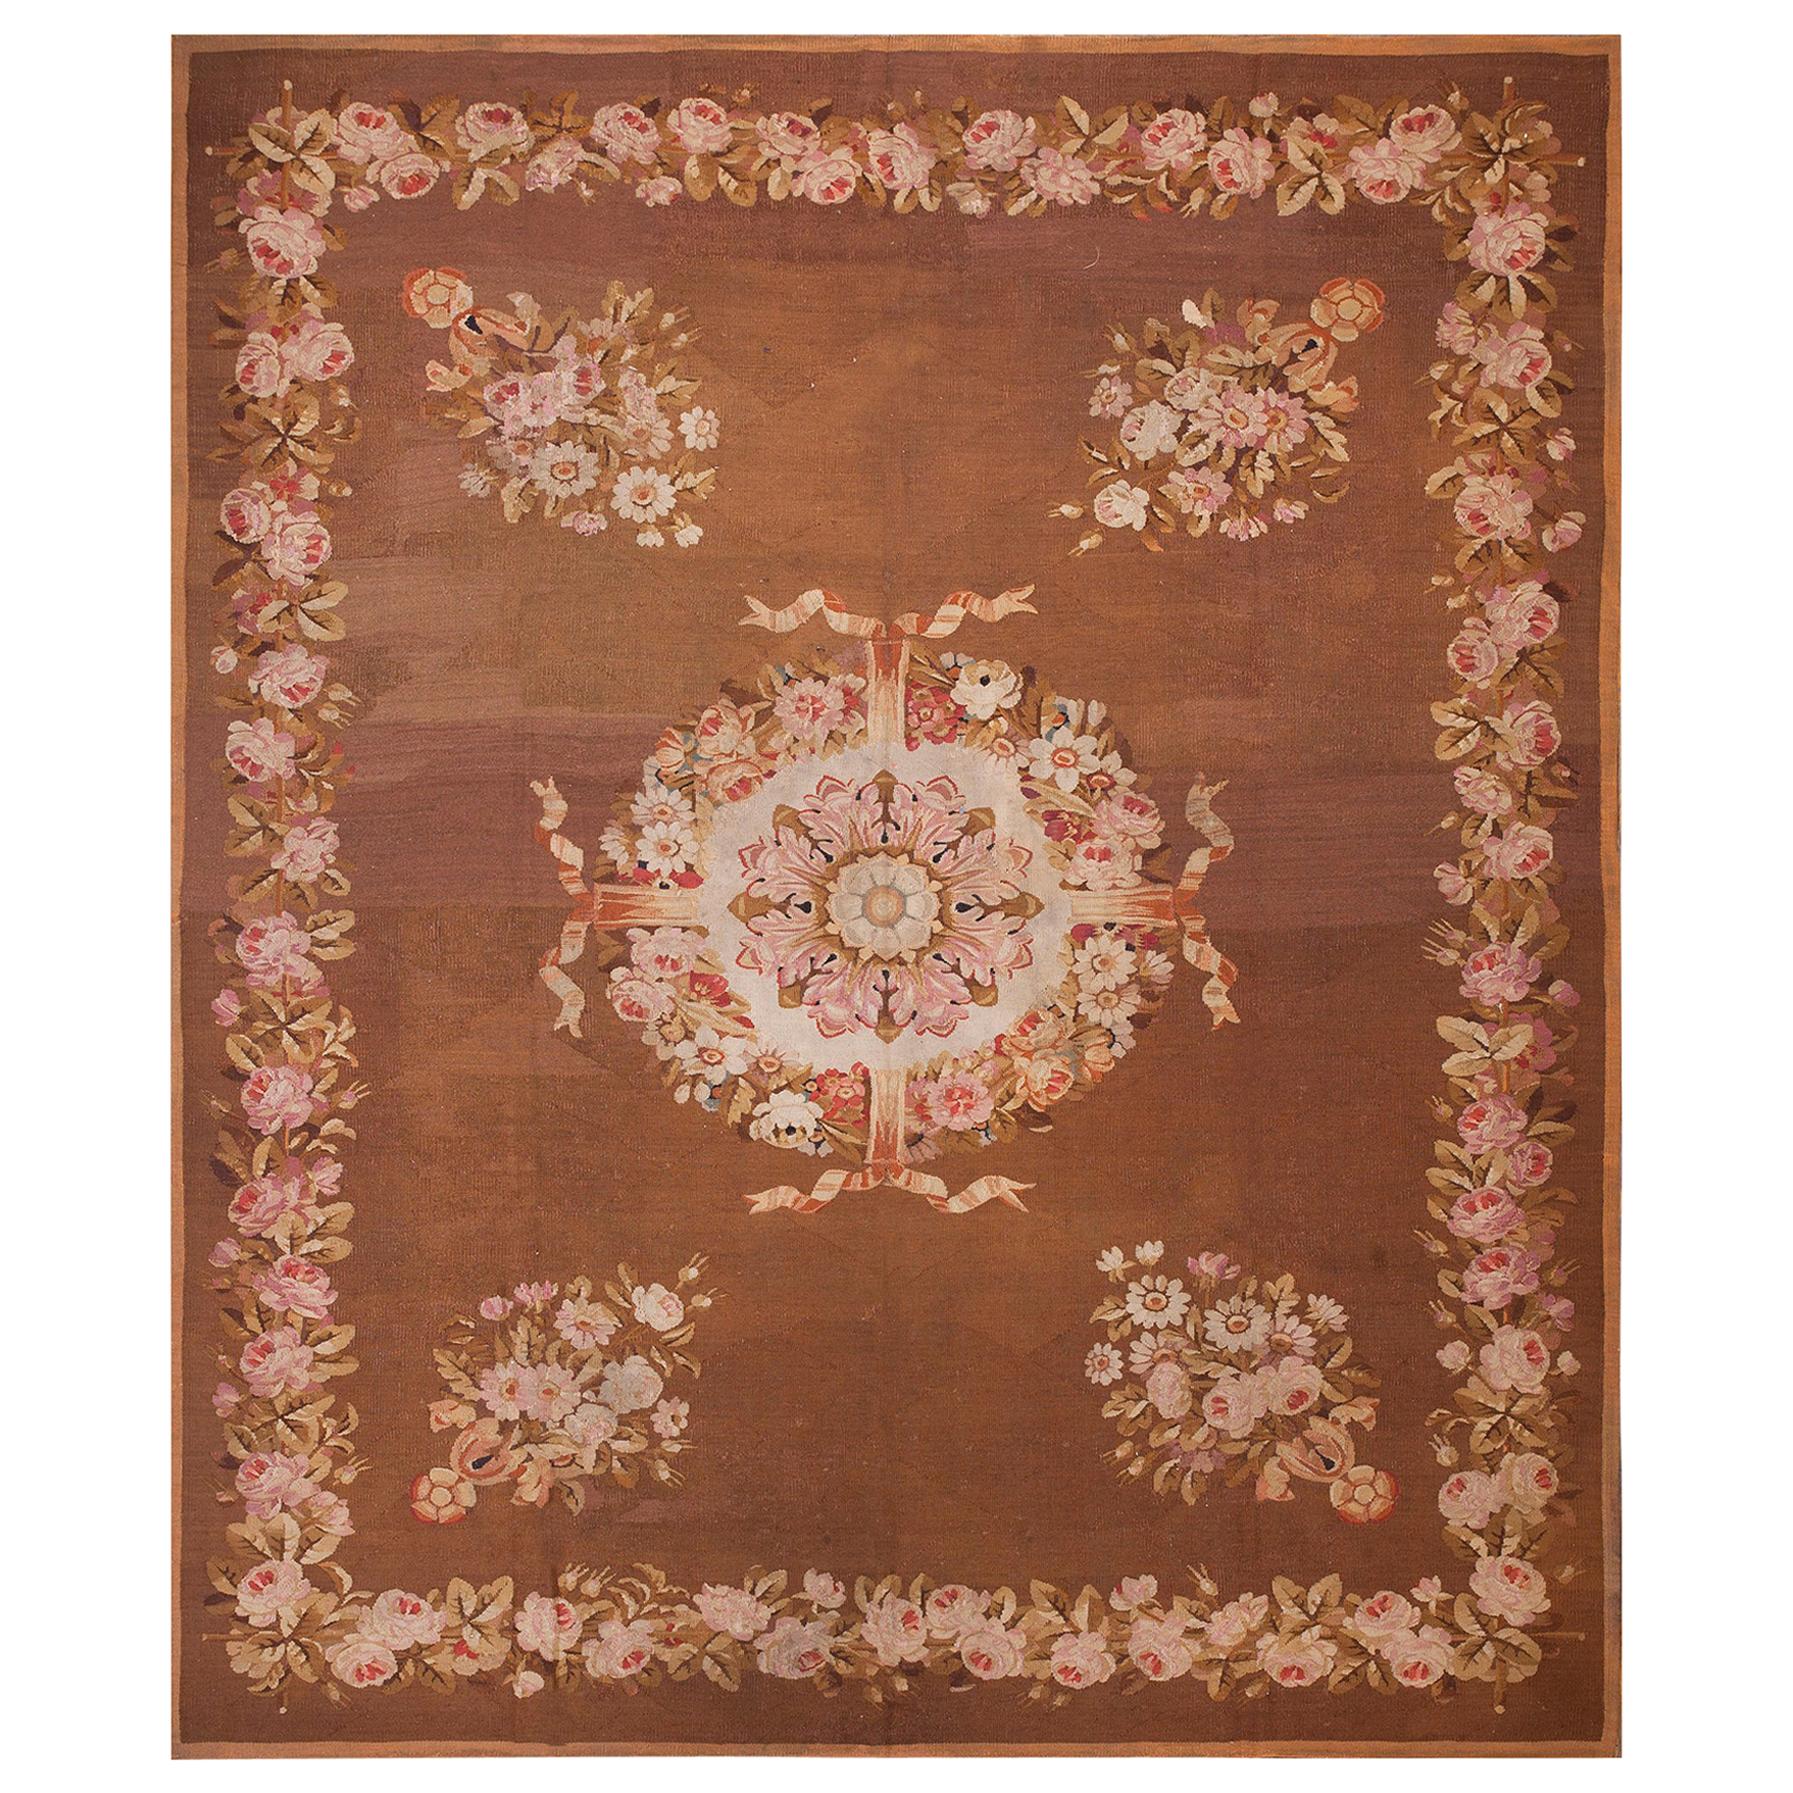 Early 19th Century French Empire Aubusson Carpet ( 8' x 9'3" - 245 x 282 ) For Sale